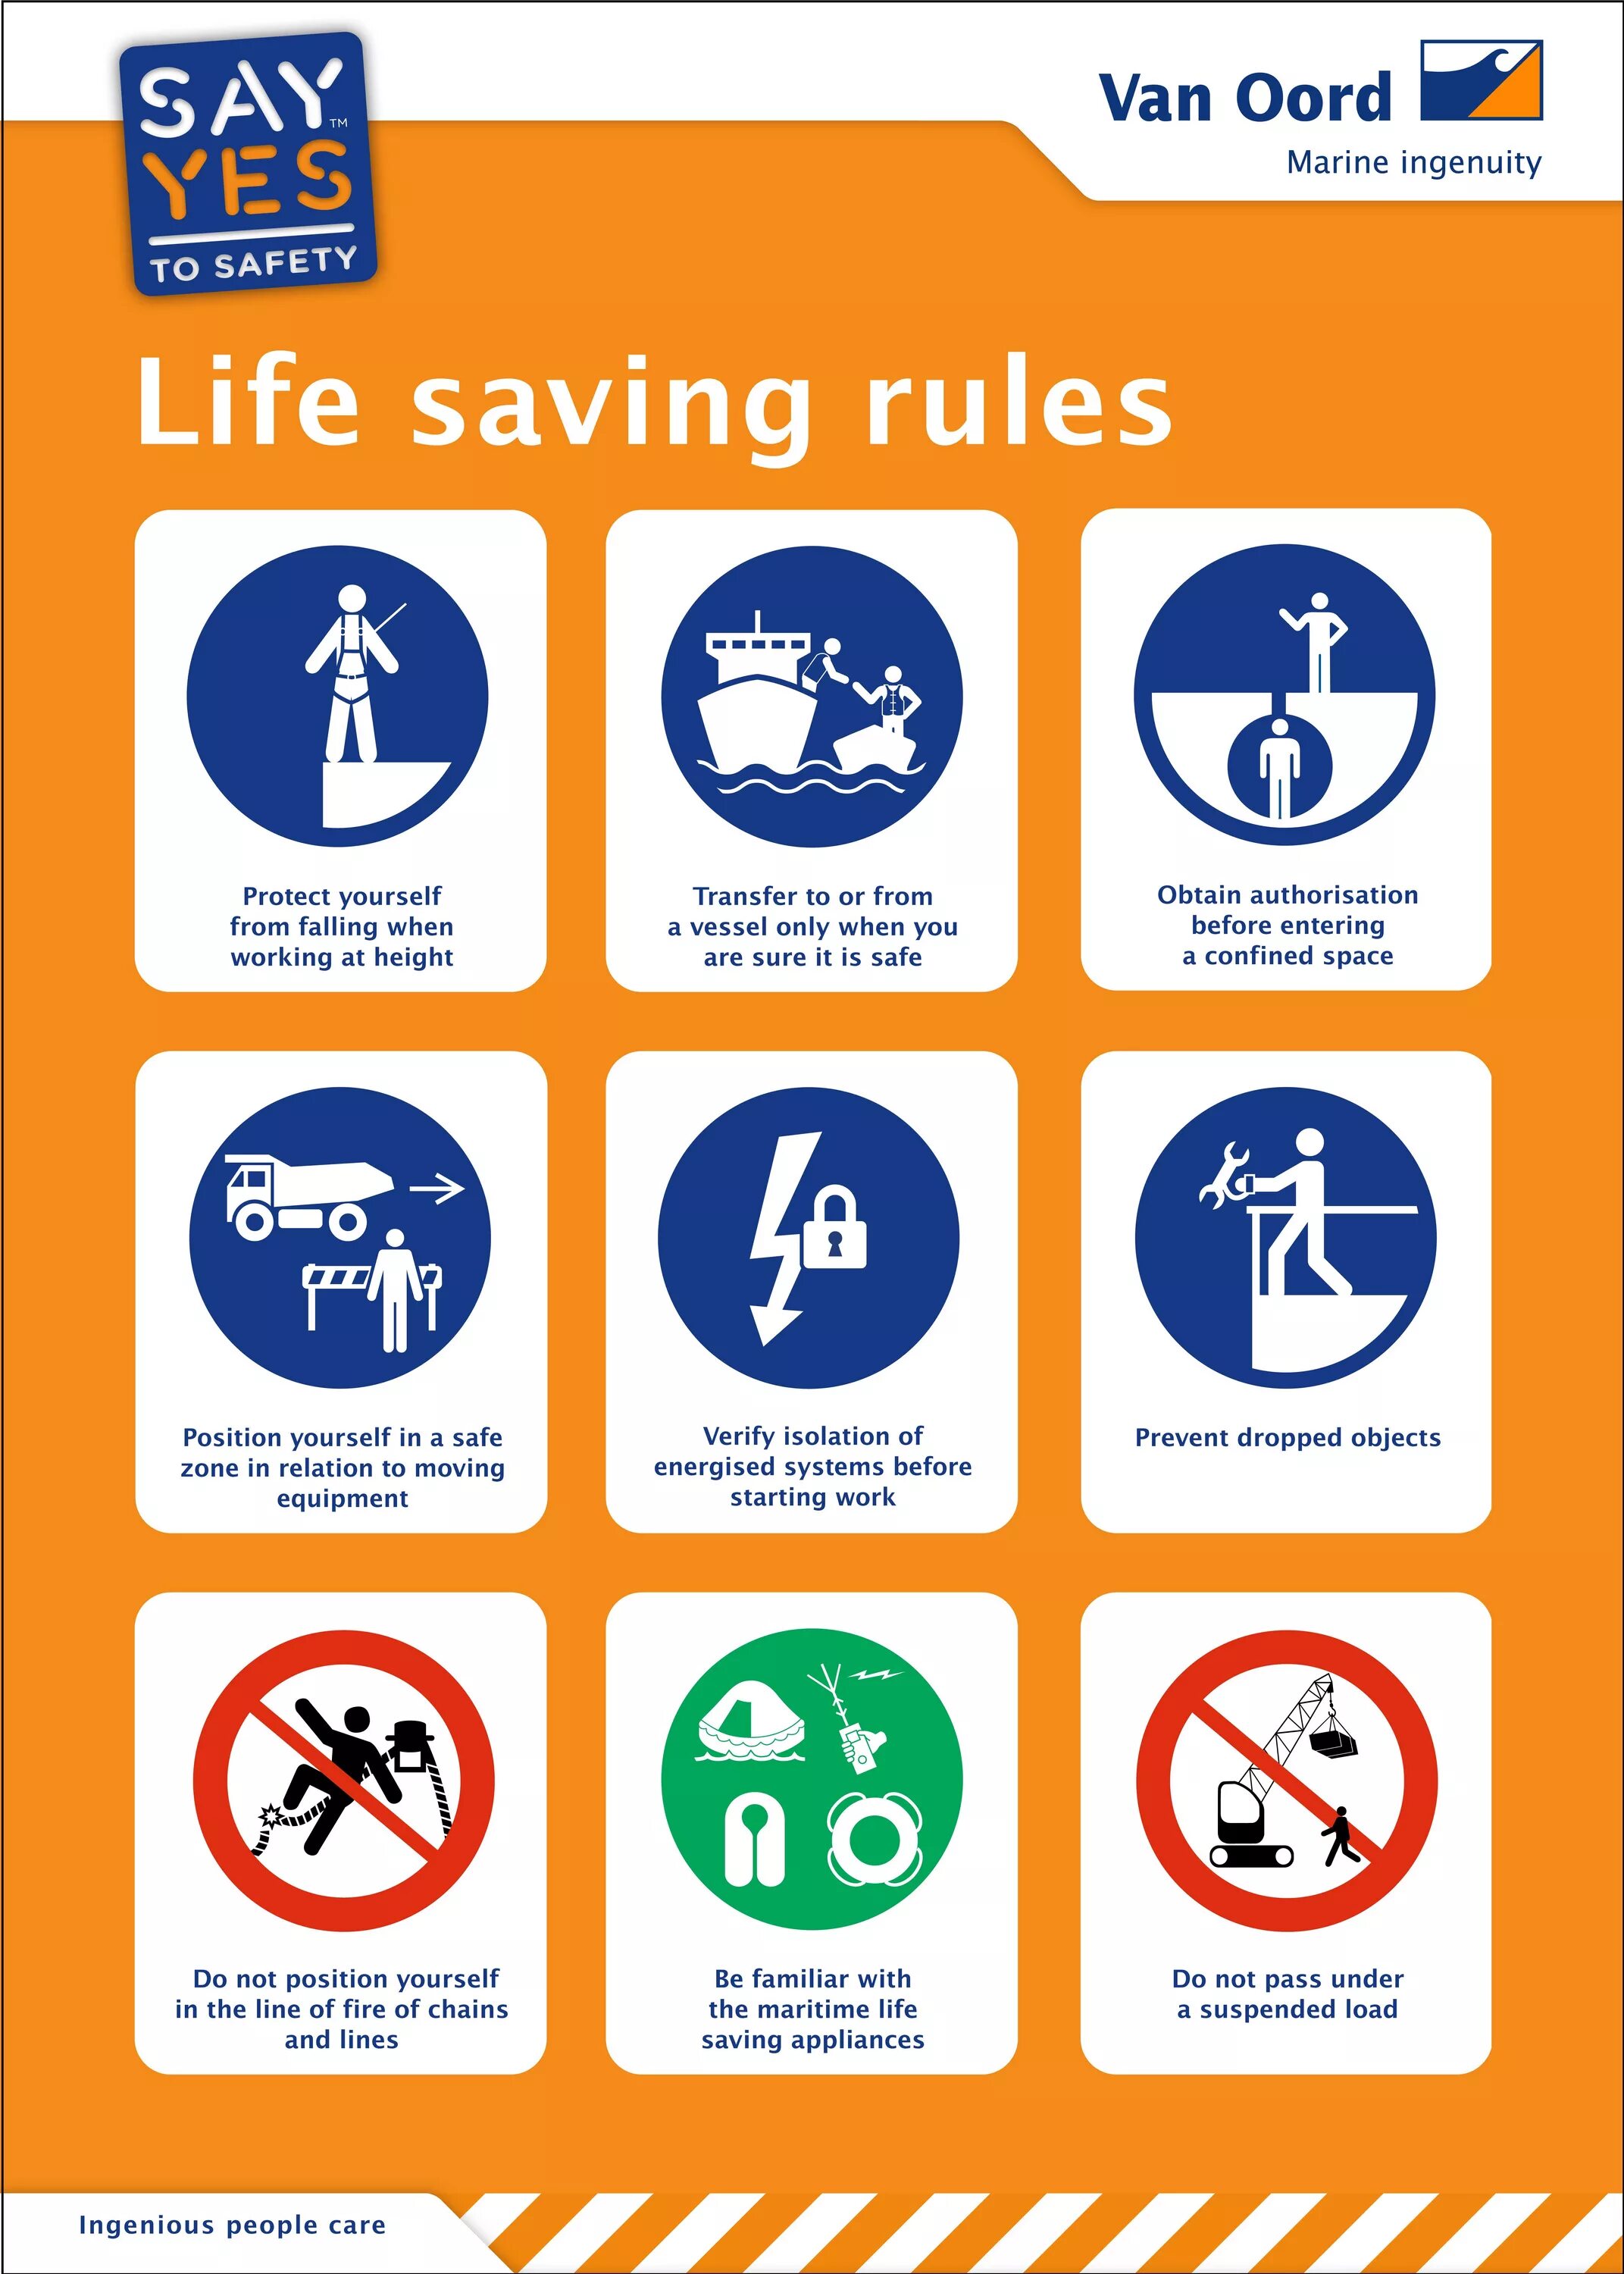 Life safety is. Life saving Rules. Safety poster. Life Safety Rules. Van Oord Marine ingenuity.